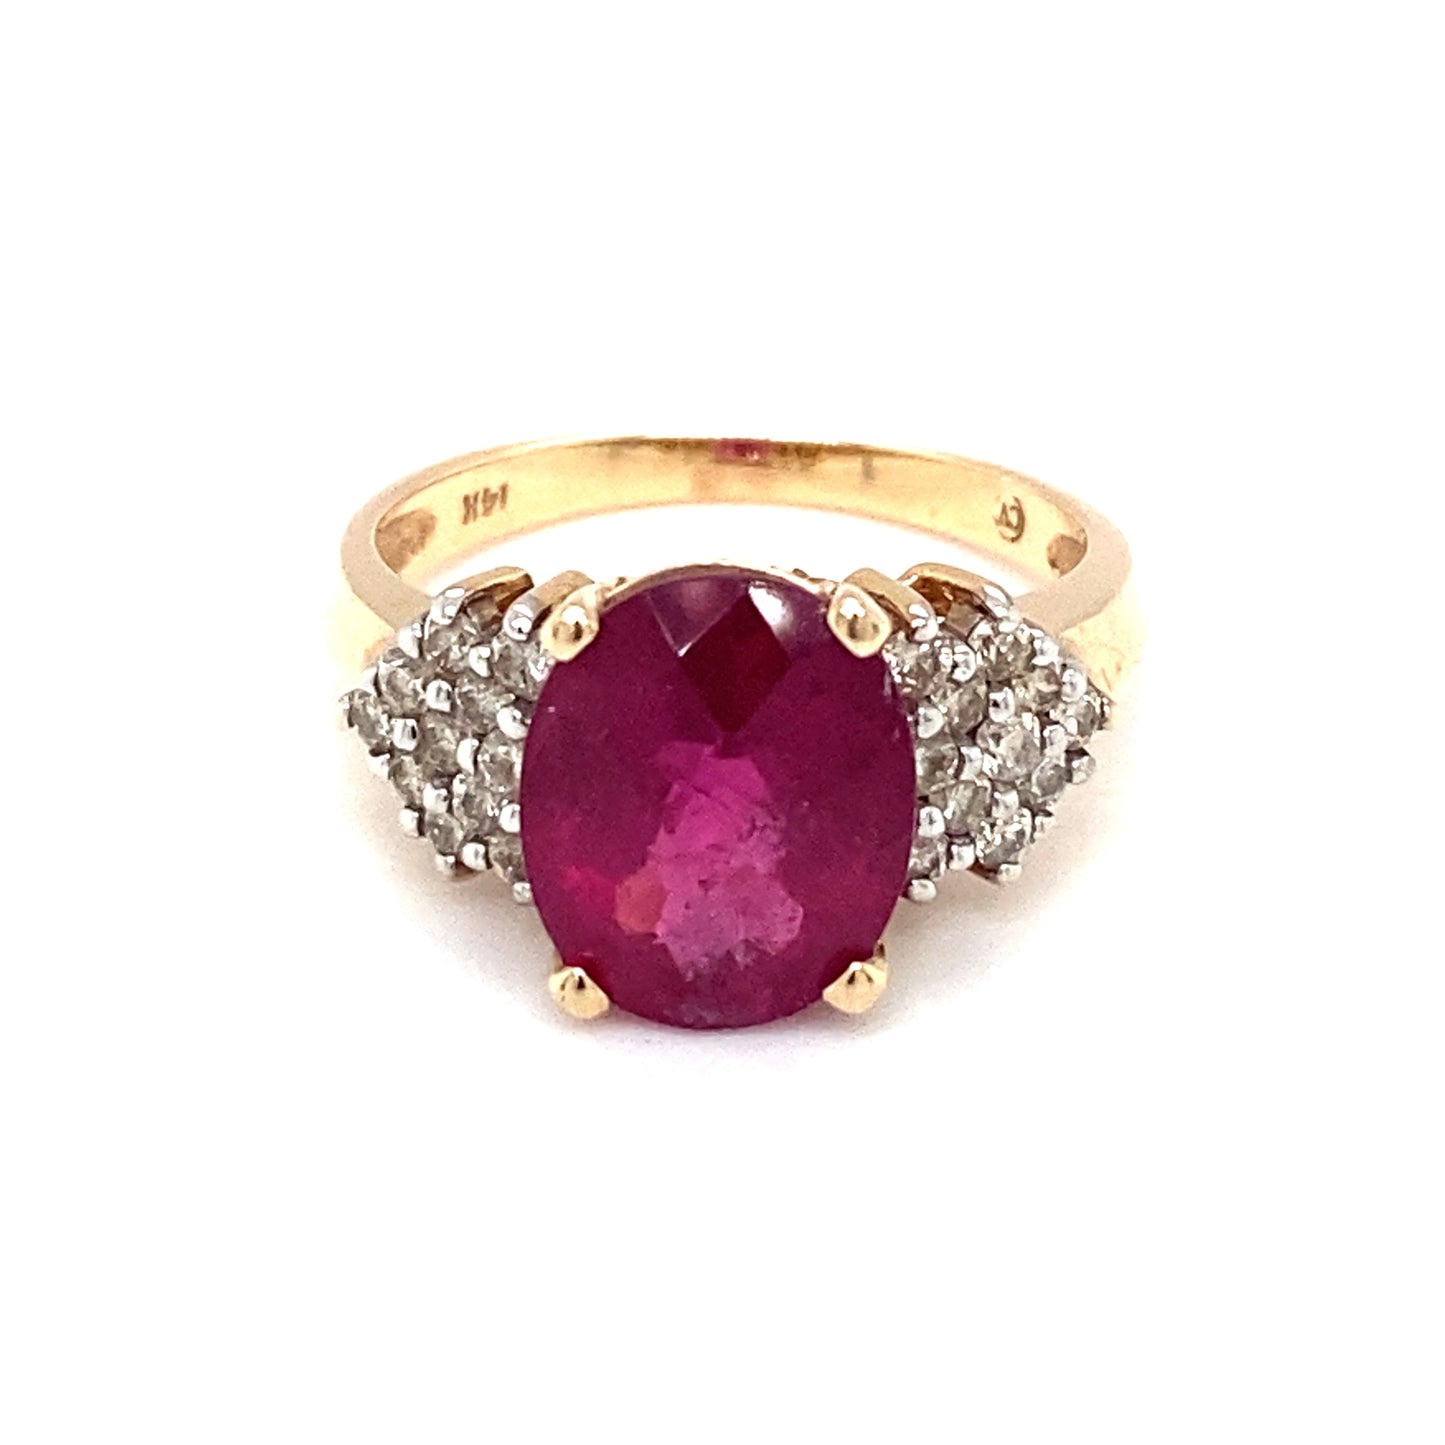 Circa 2000s Oval Pink Tourmaline and Diamond Cocktail Ring in 14k Gold